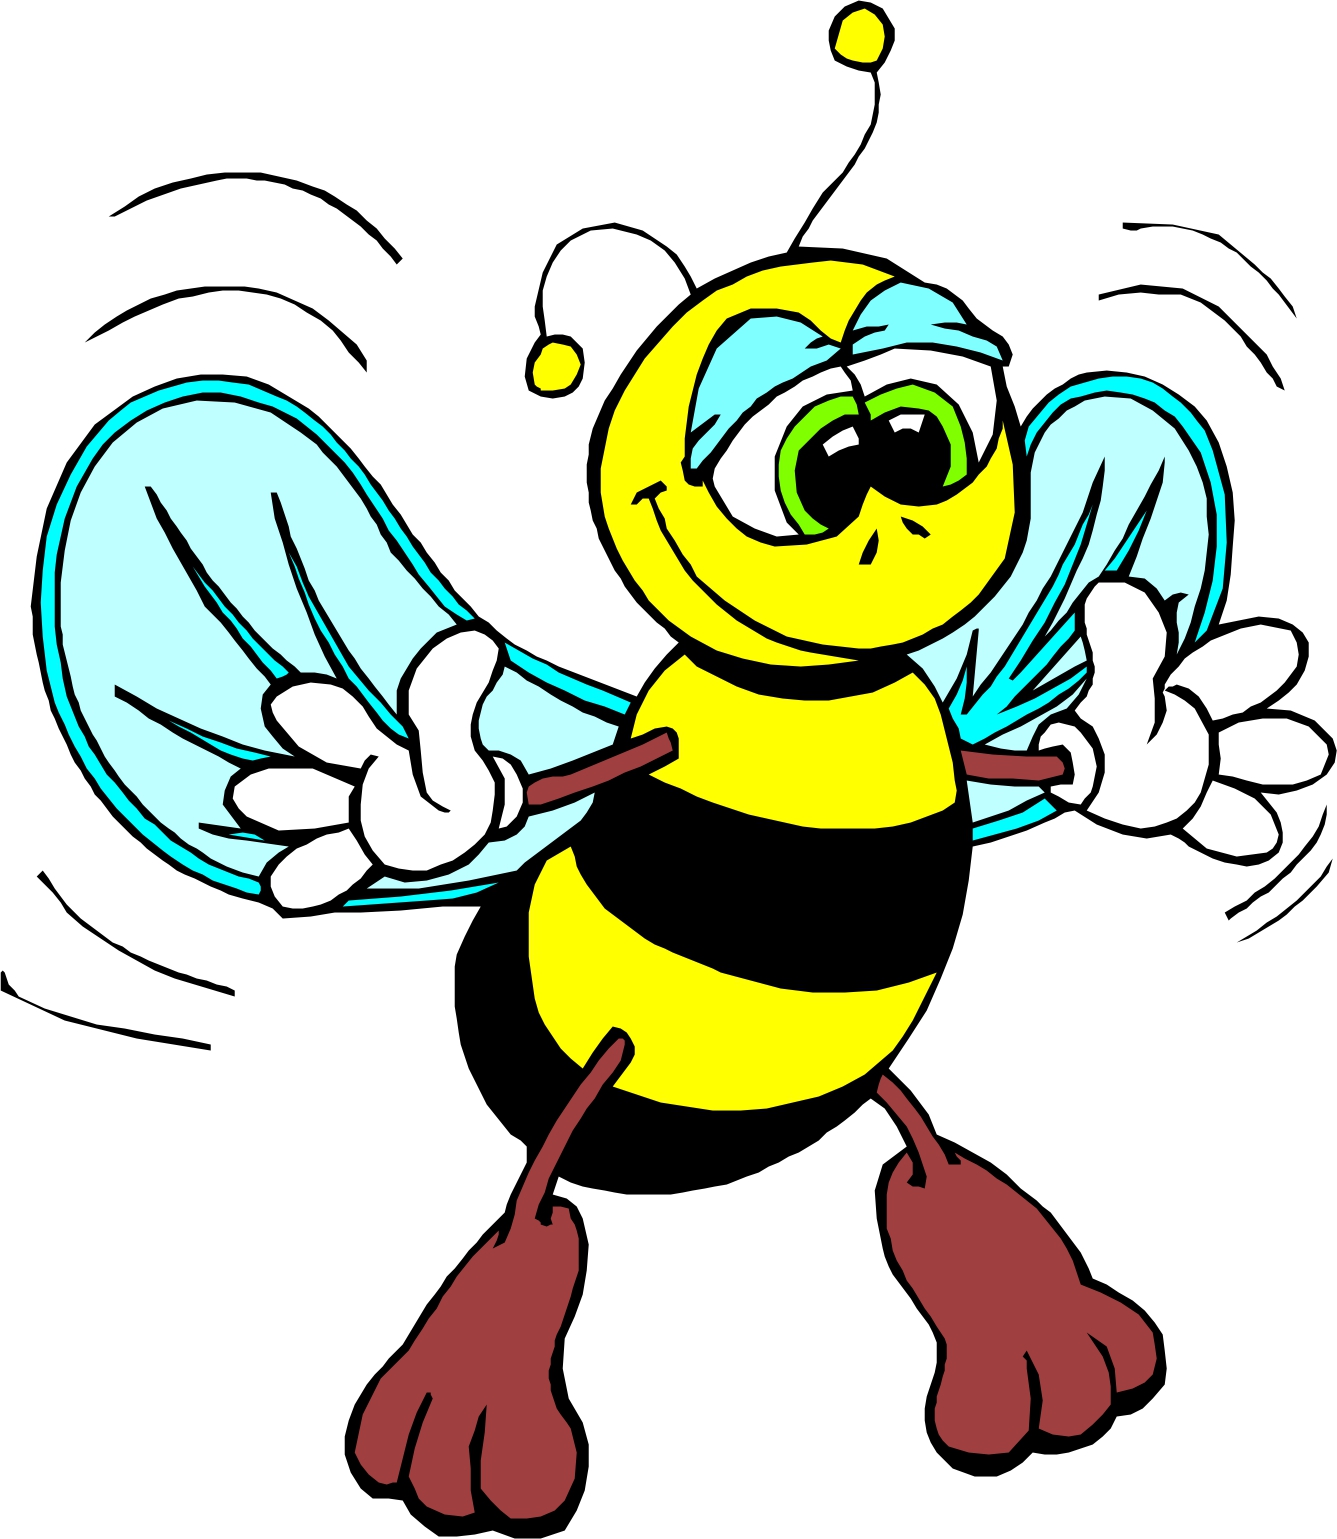 Cartoon Bee Images & Pictures - Becuo